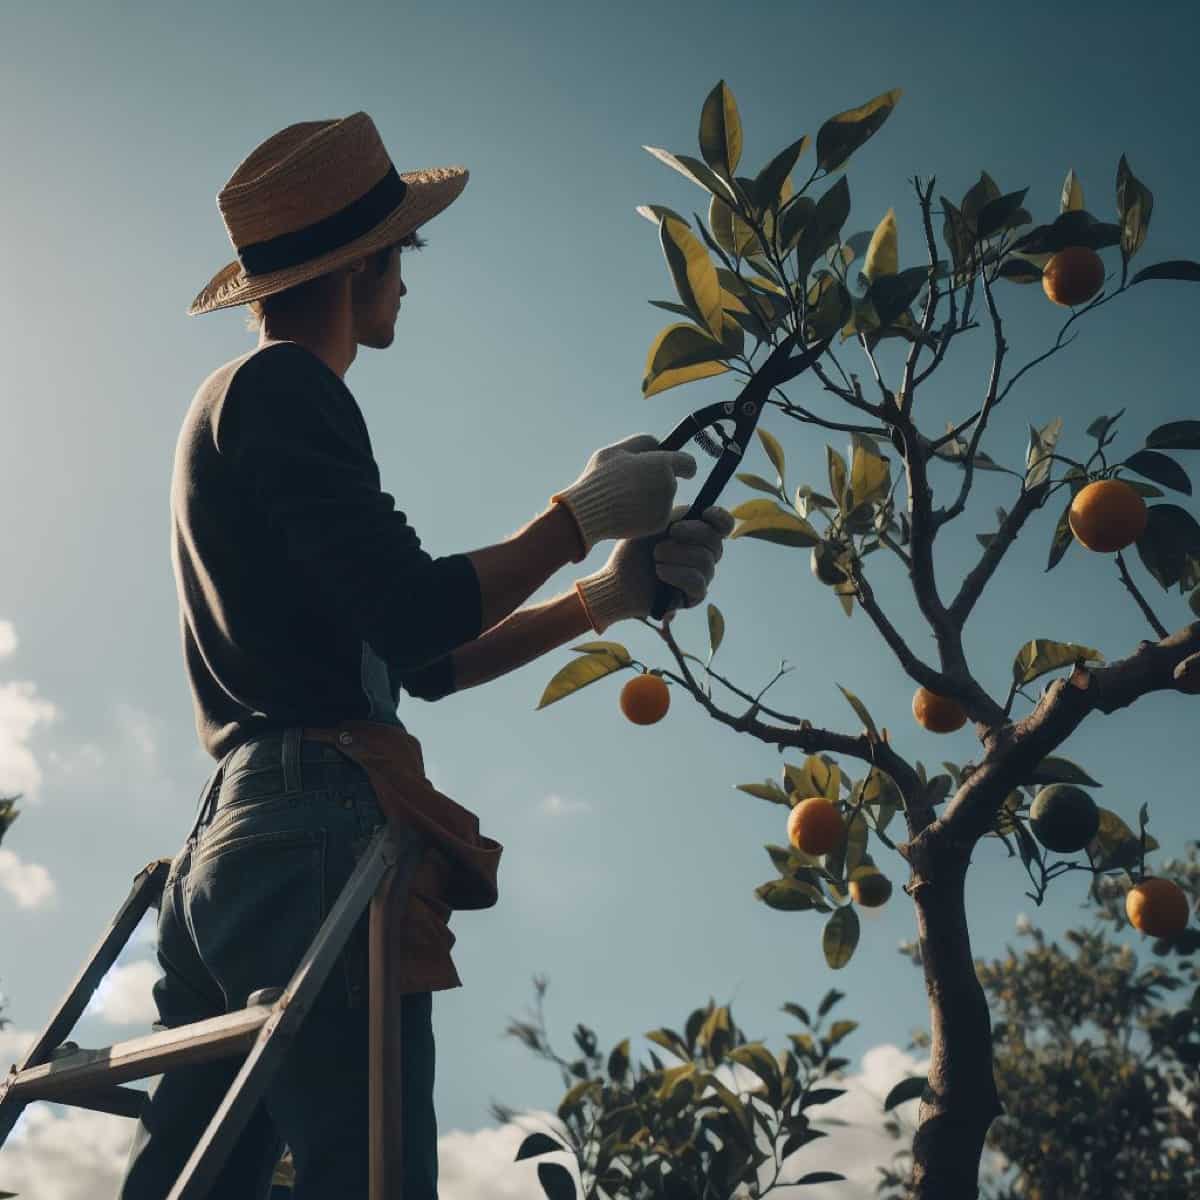 Pruning a citrus tree